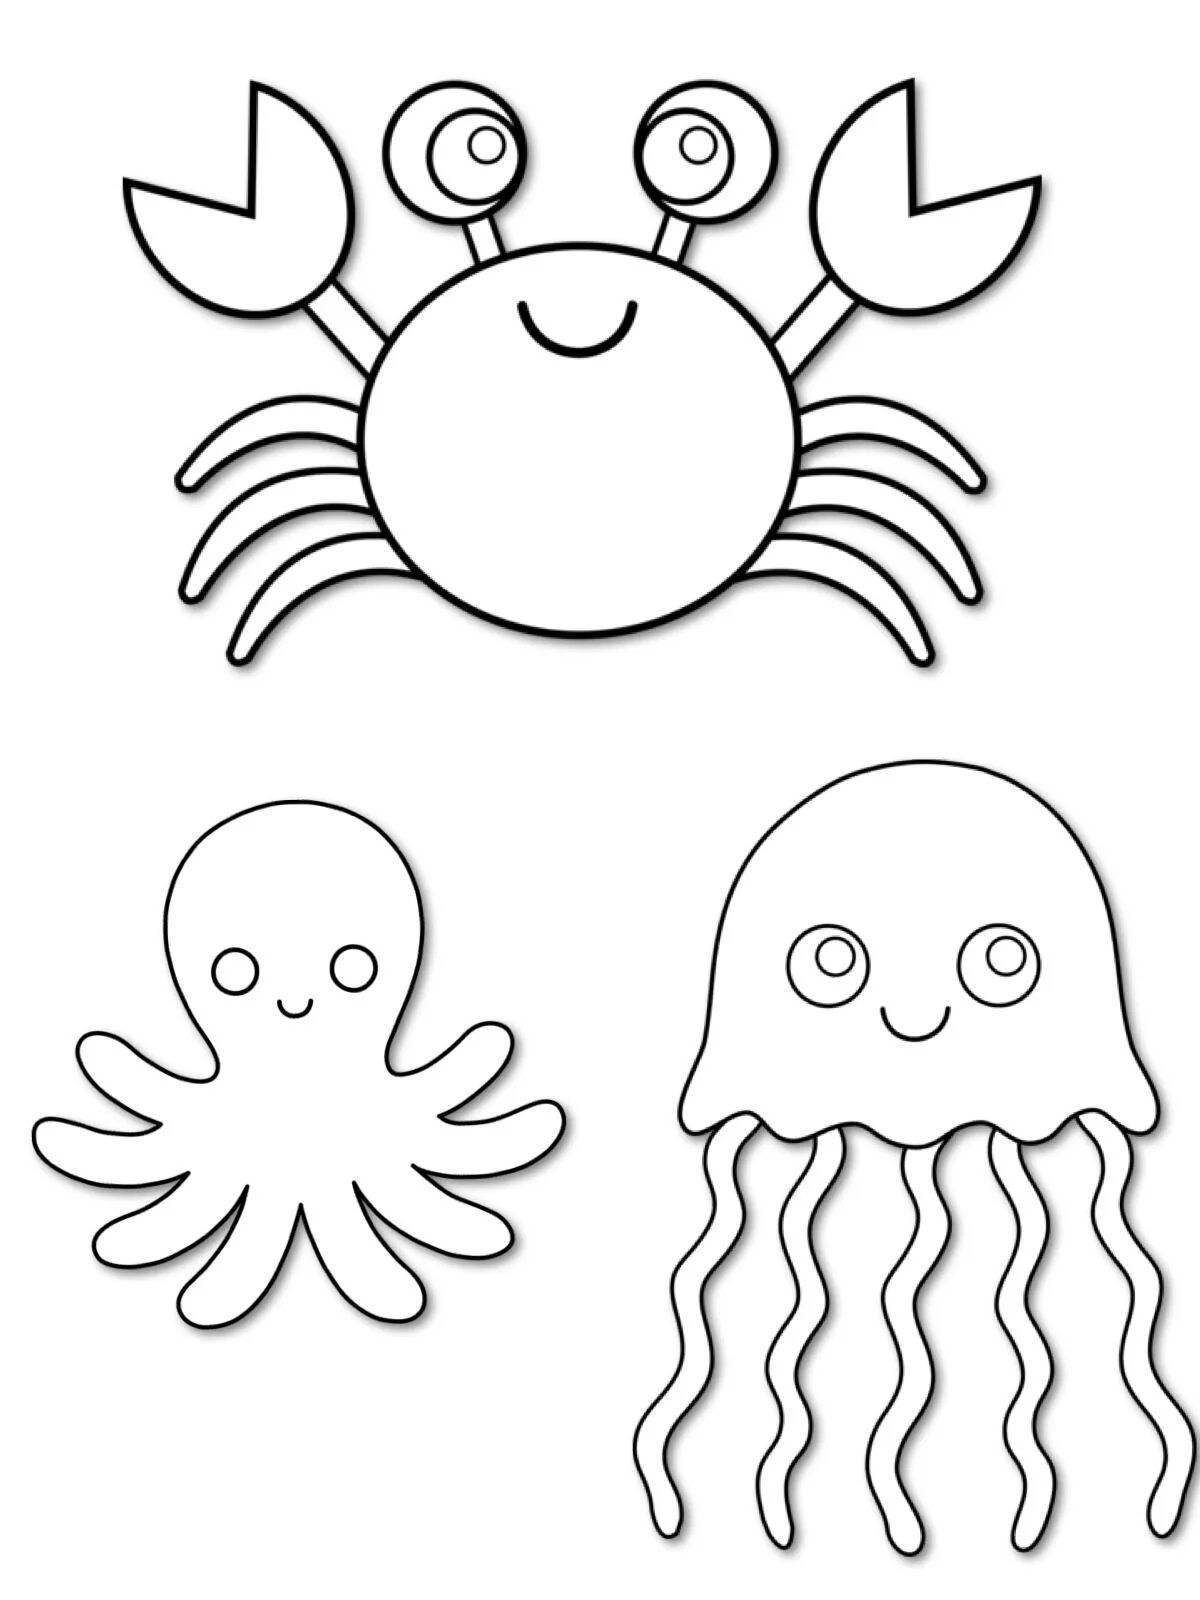 Colourful coloring pages for the holidays